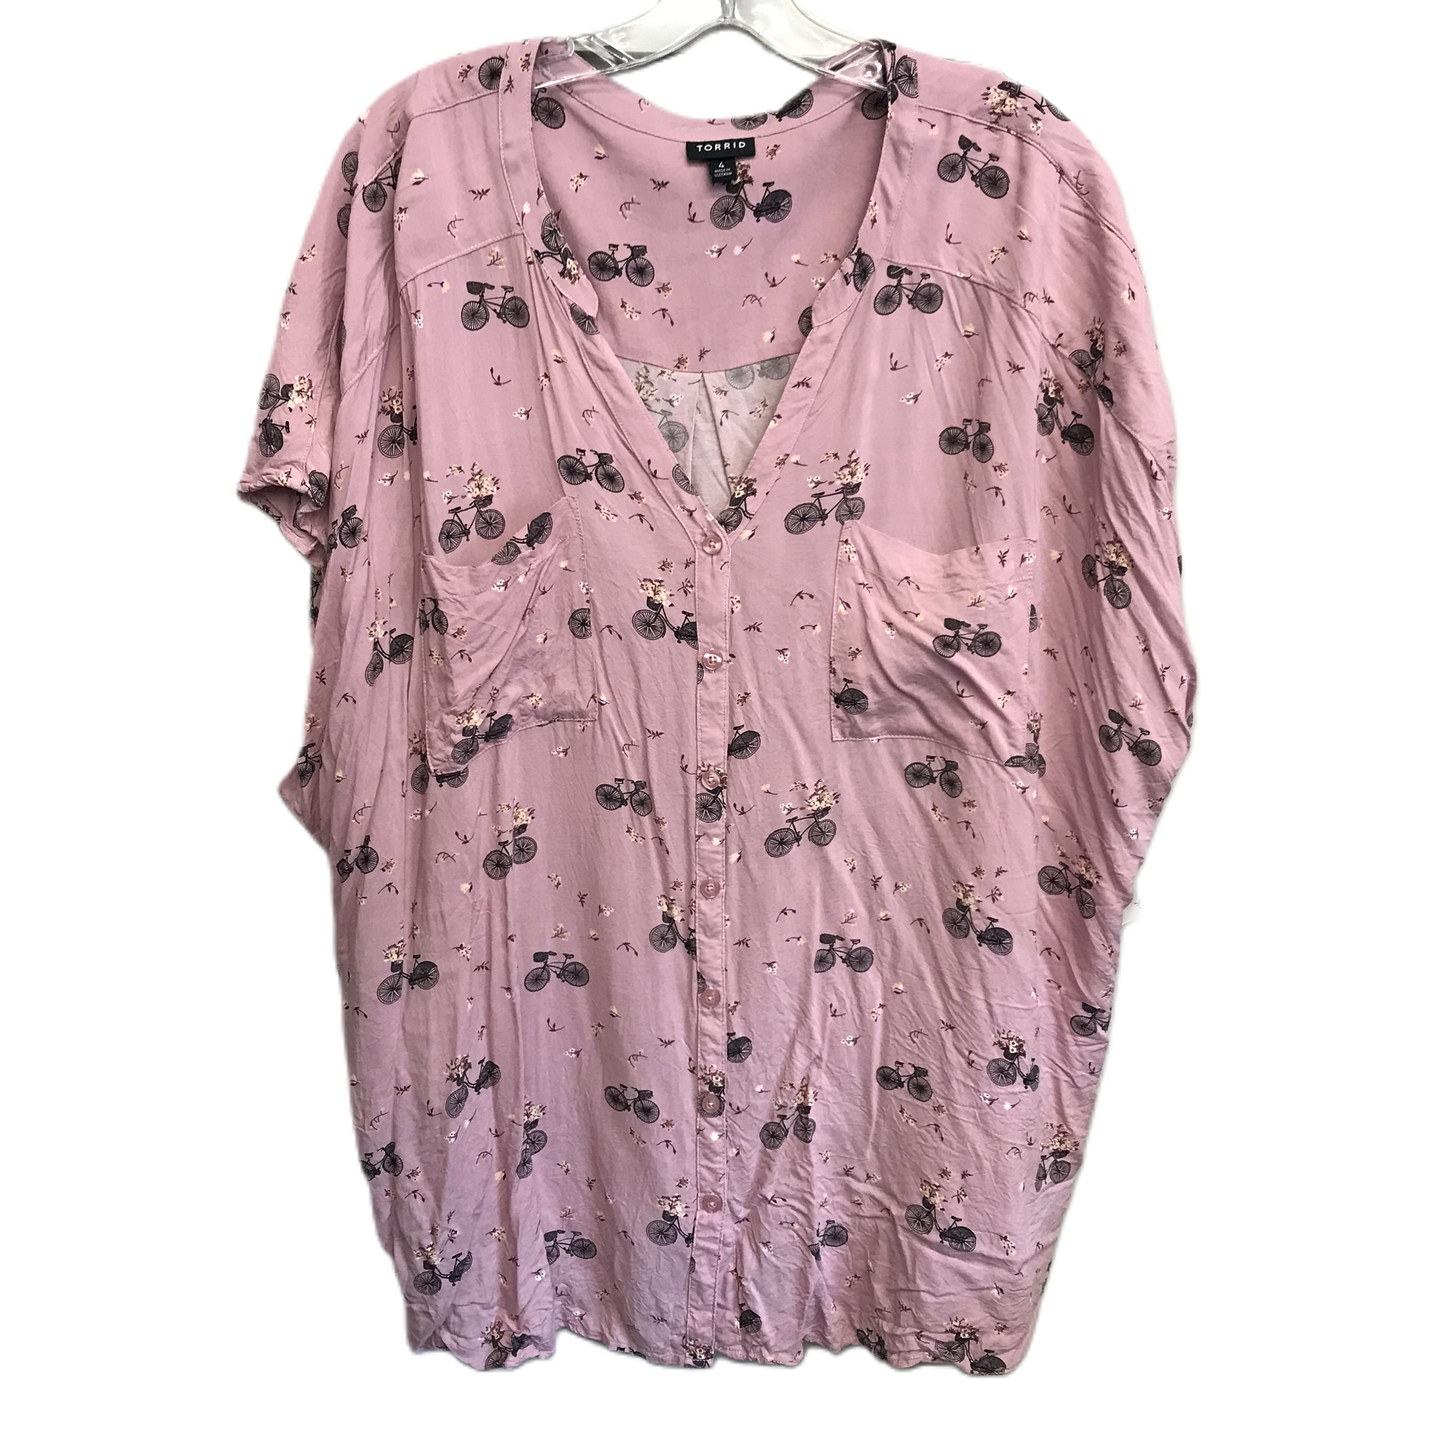 Pink Top Short Sleeve By Torrid, Size: 4x